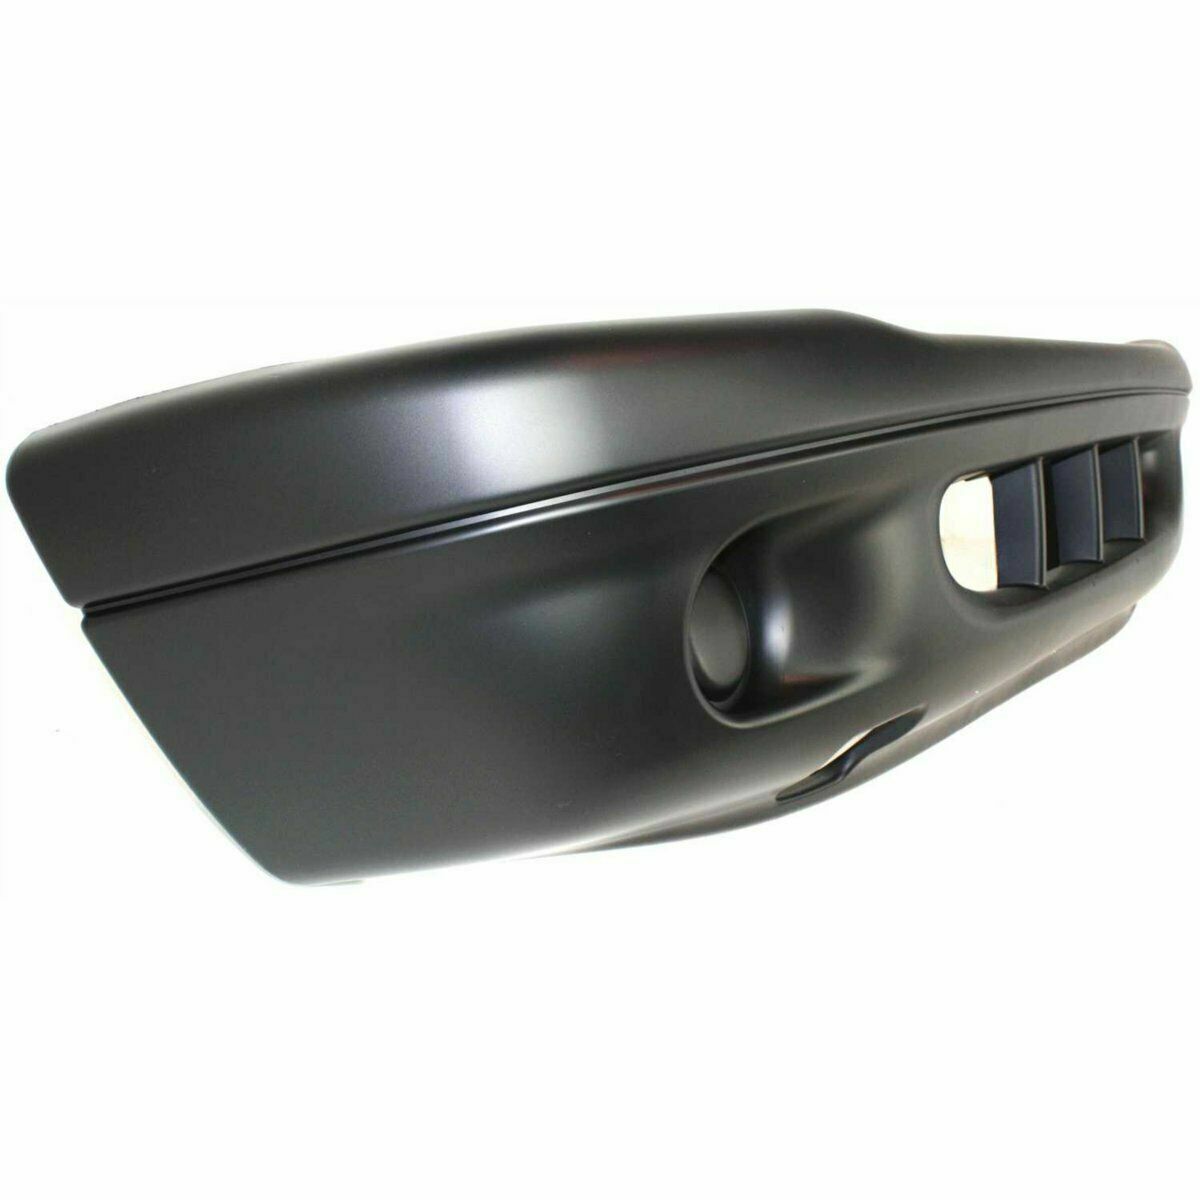 2001-2004 DODGE DURANGO; Front Bumper Cover; w/o fog 1pc upper lower ptd Painted to Match